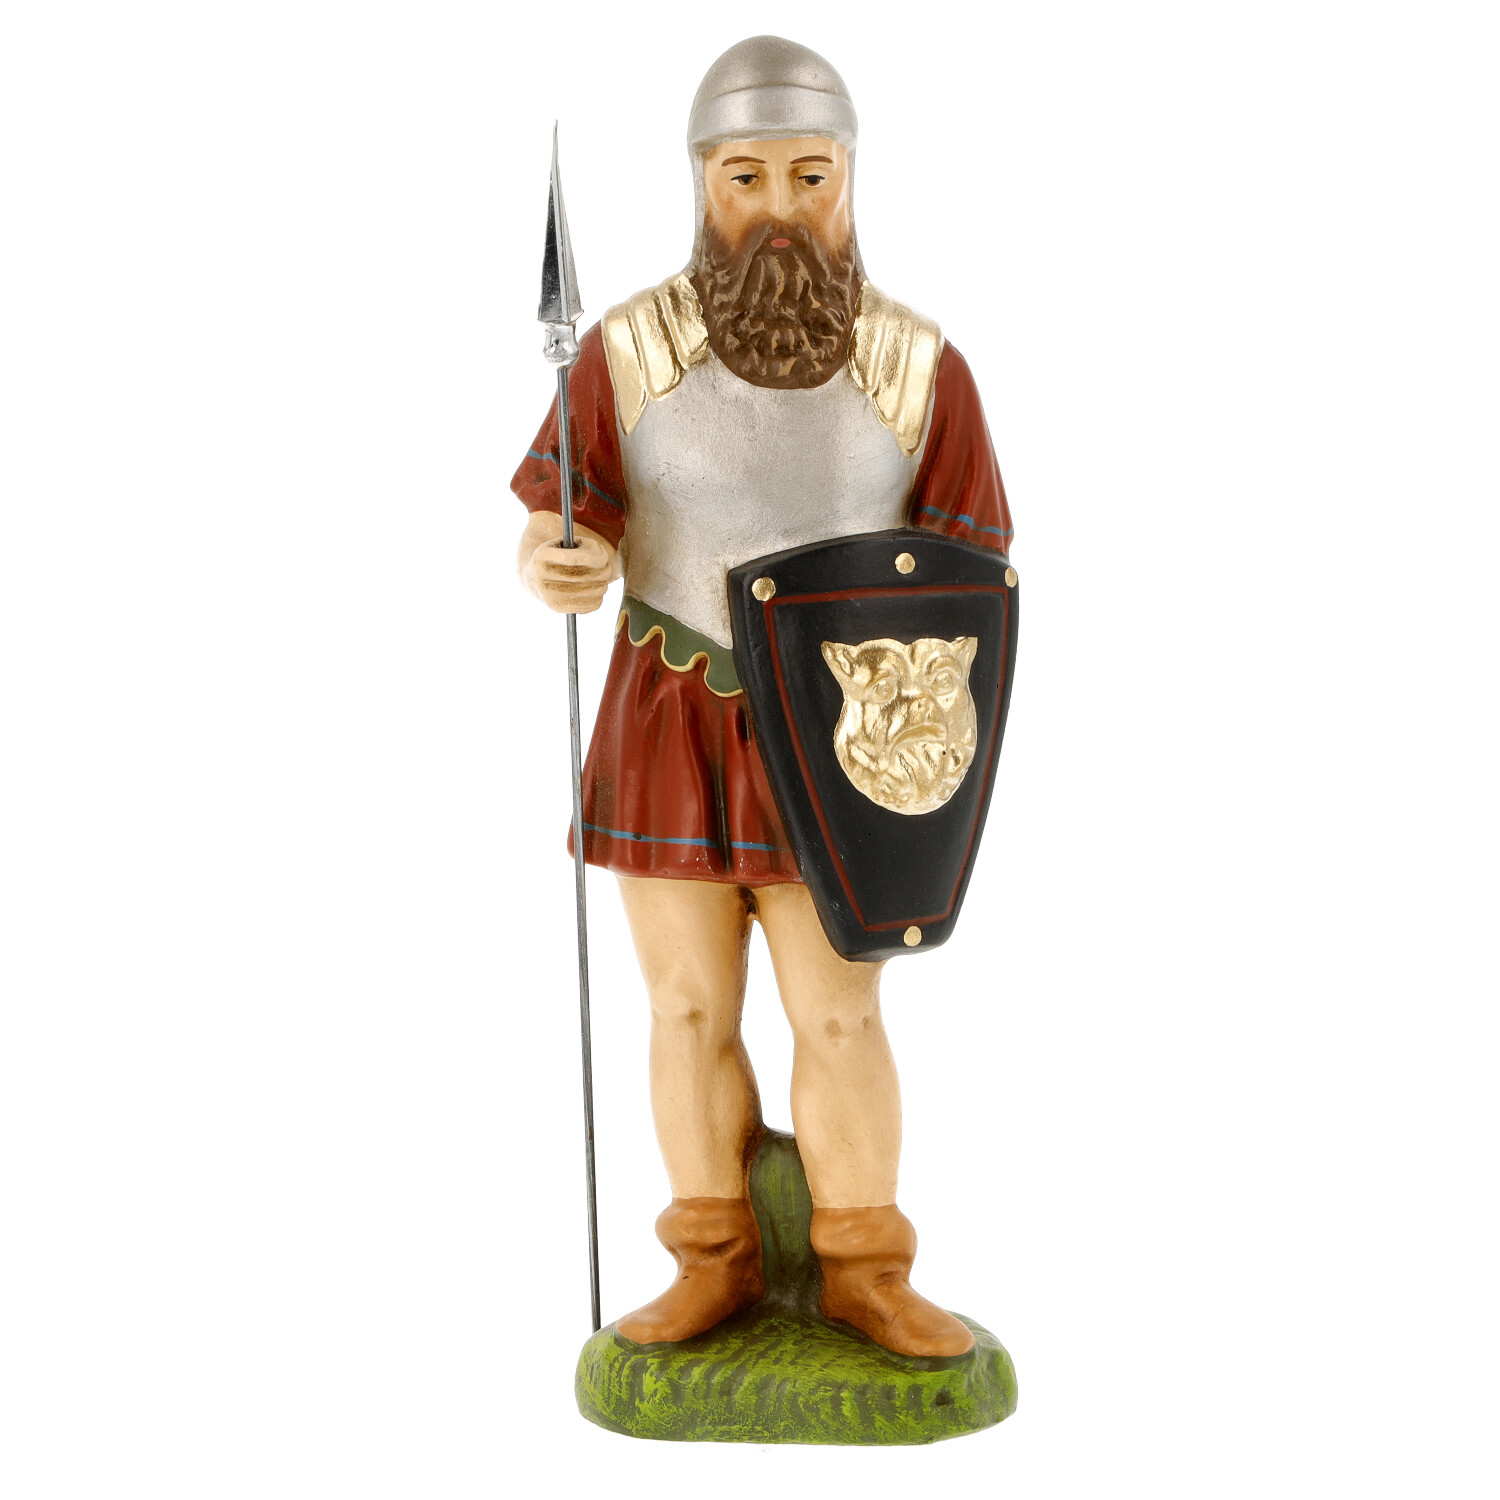 Roman soldier with lance - Marolin Nativity figure - made in Germany